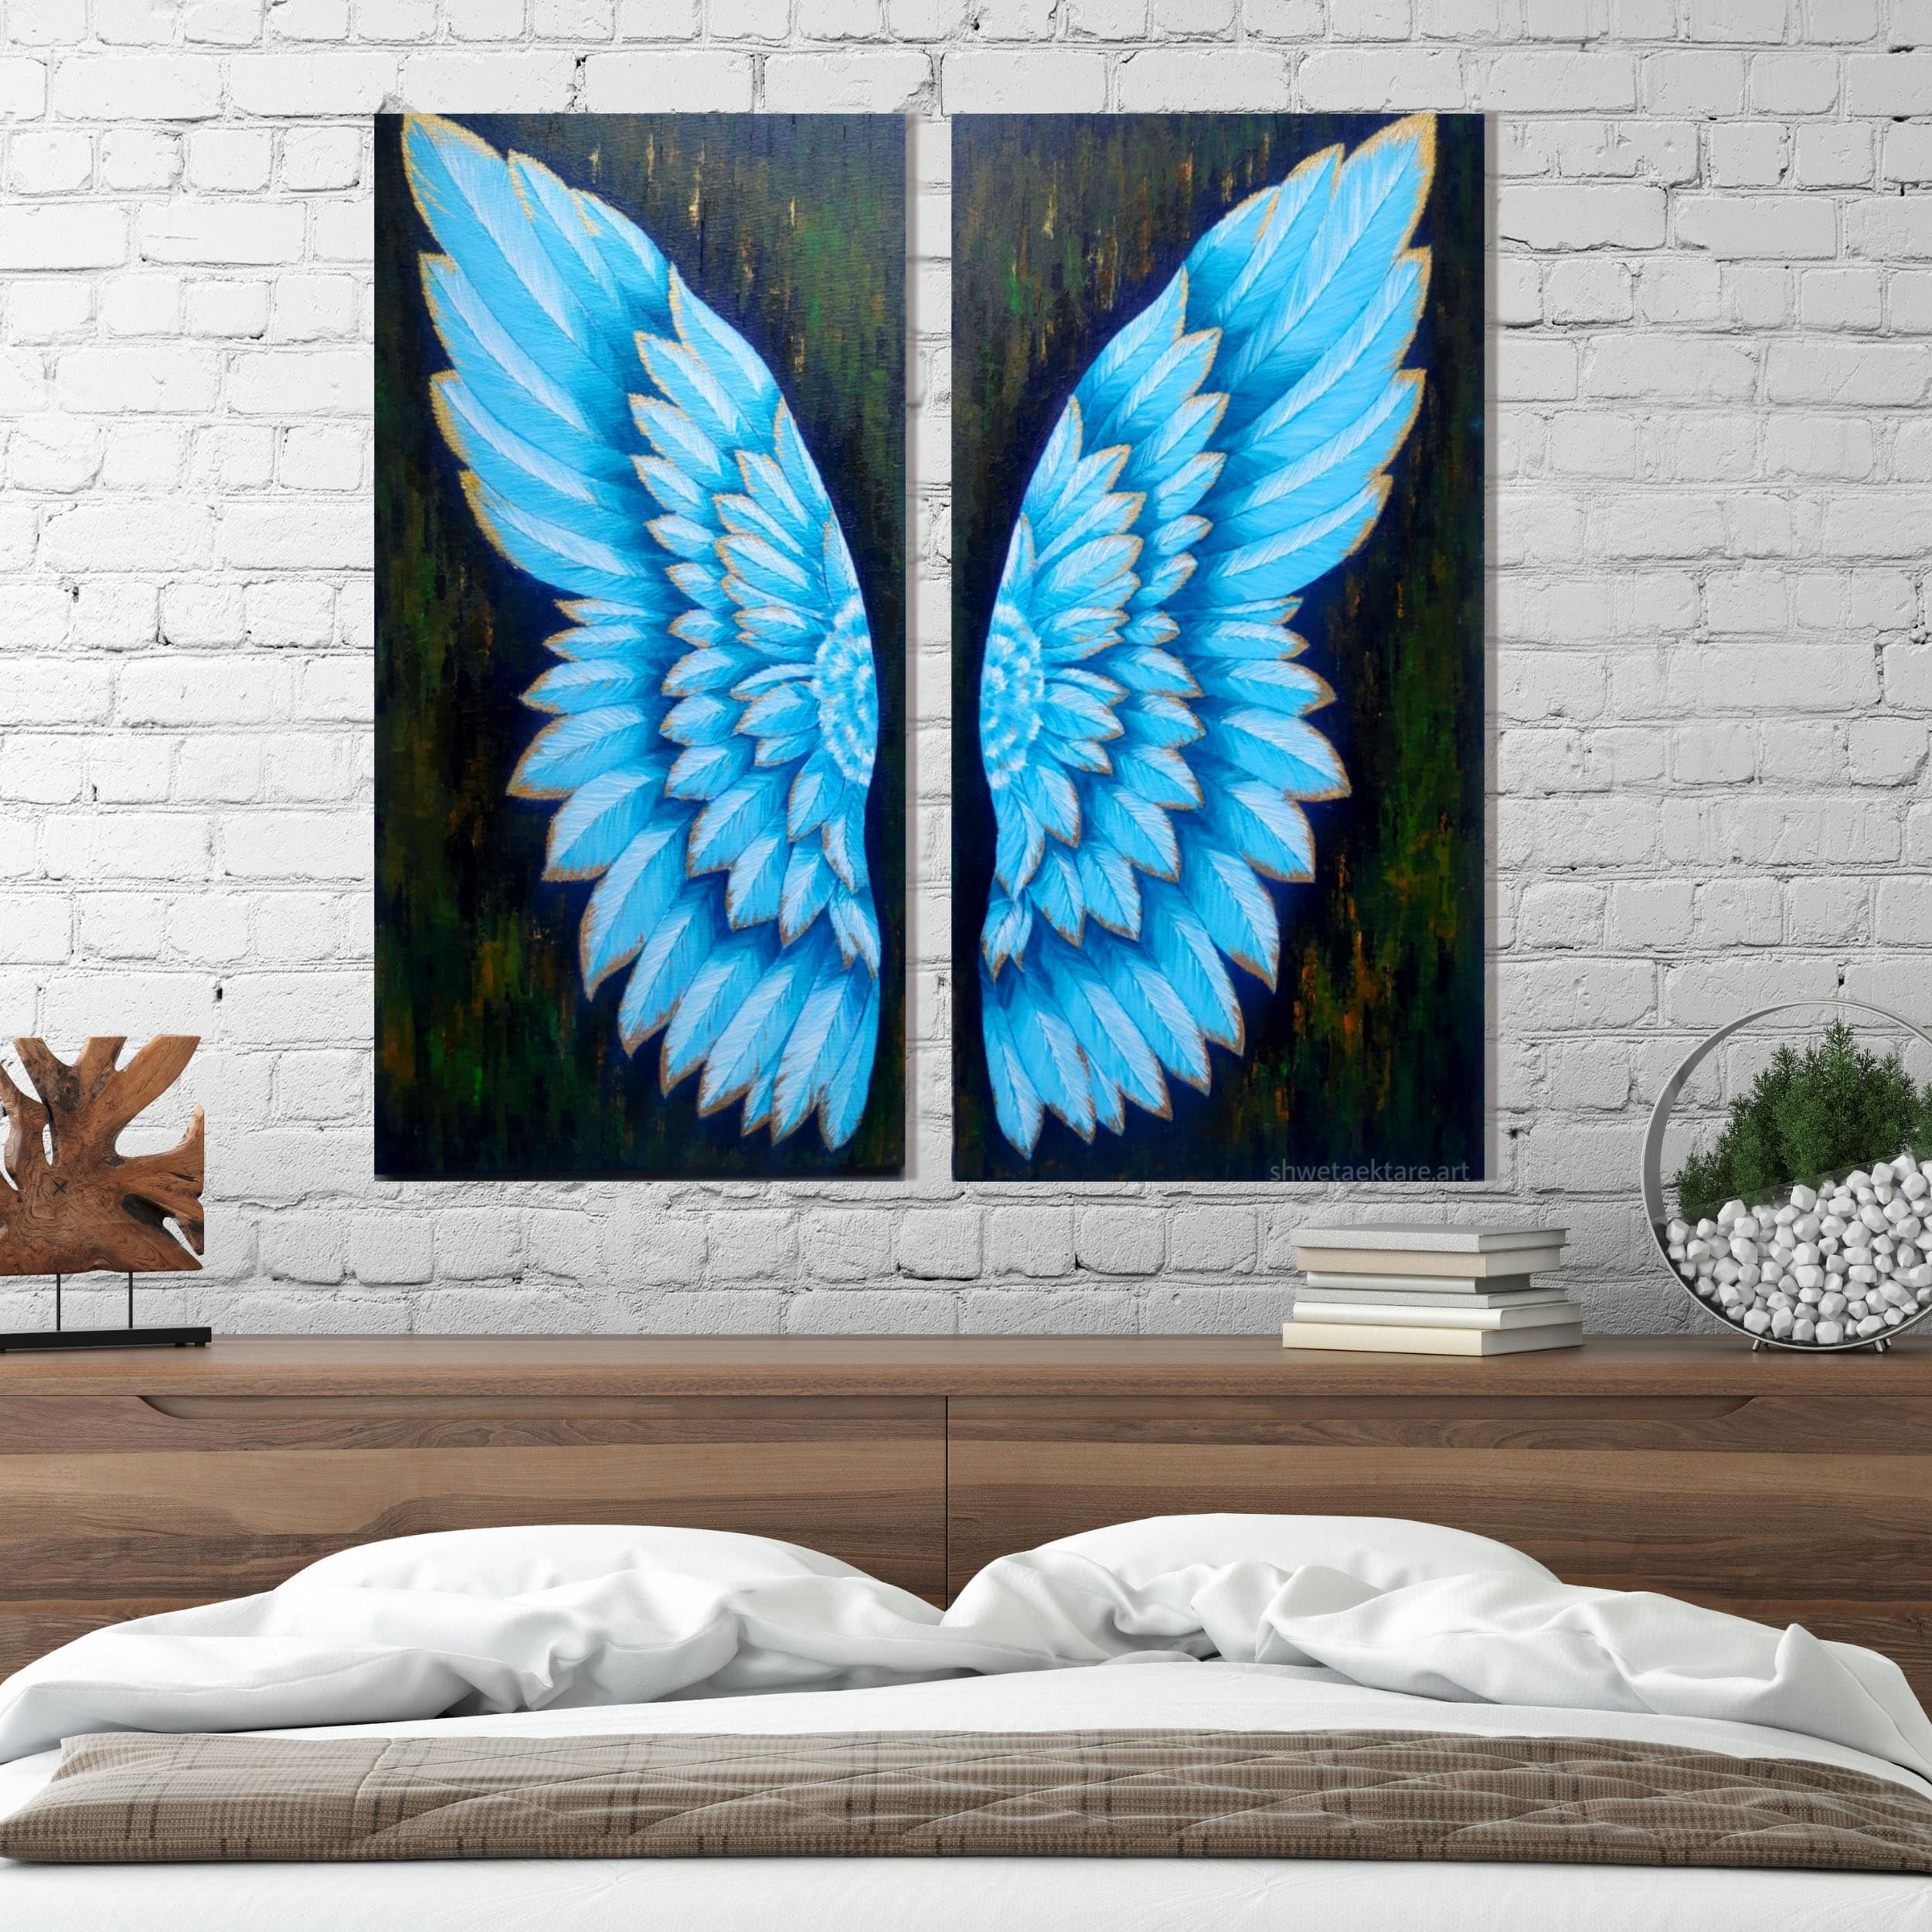 The angel wing is very special as it is a symbol of angels. It is believed that everyone has their own guardian angel watching over them, providing them with protection, courage, love, and harmony.
Size: 30x30"
Diptych